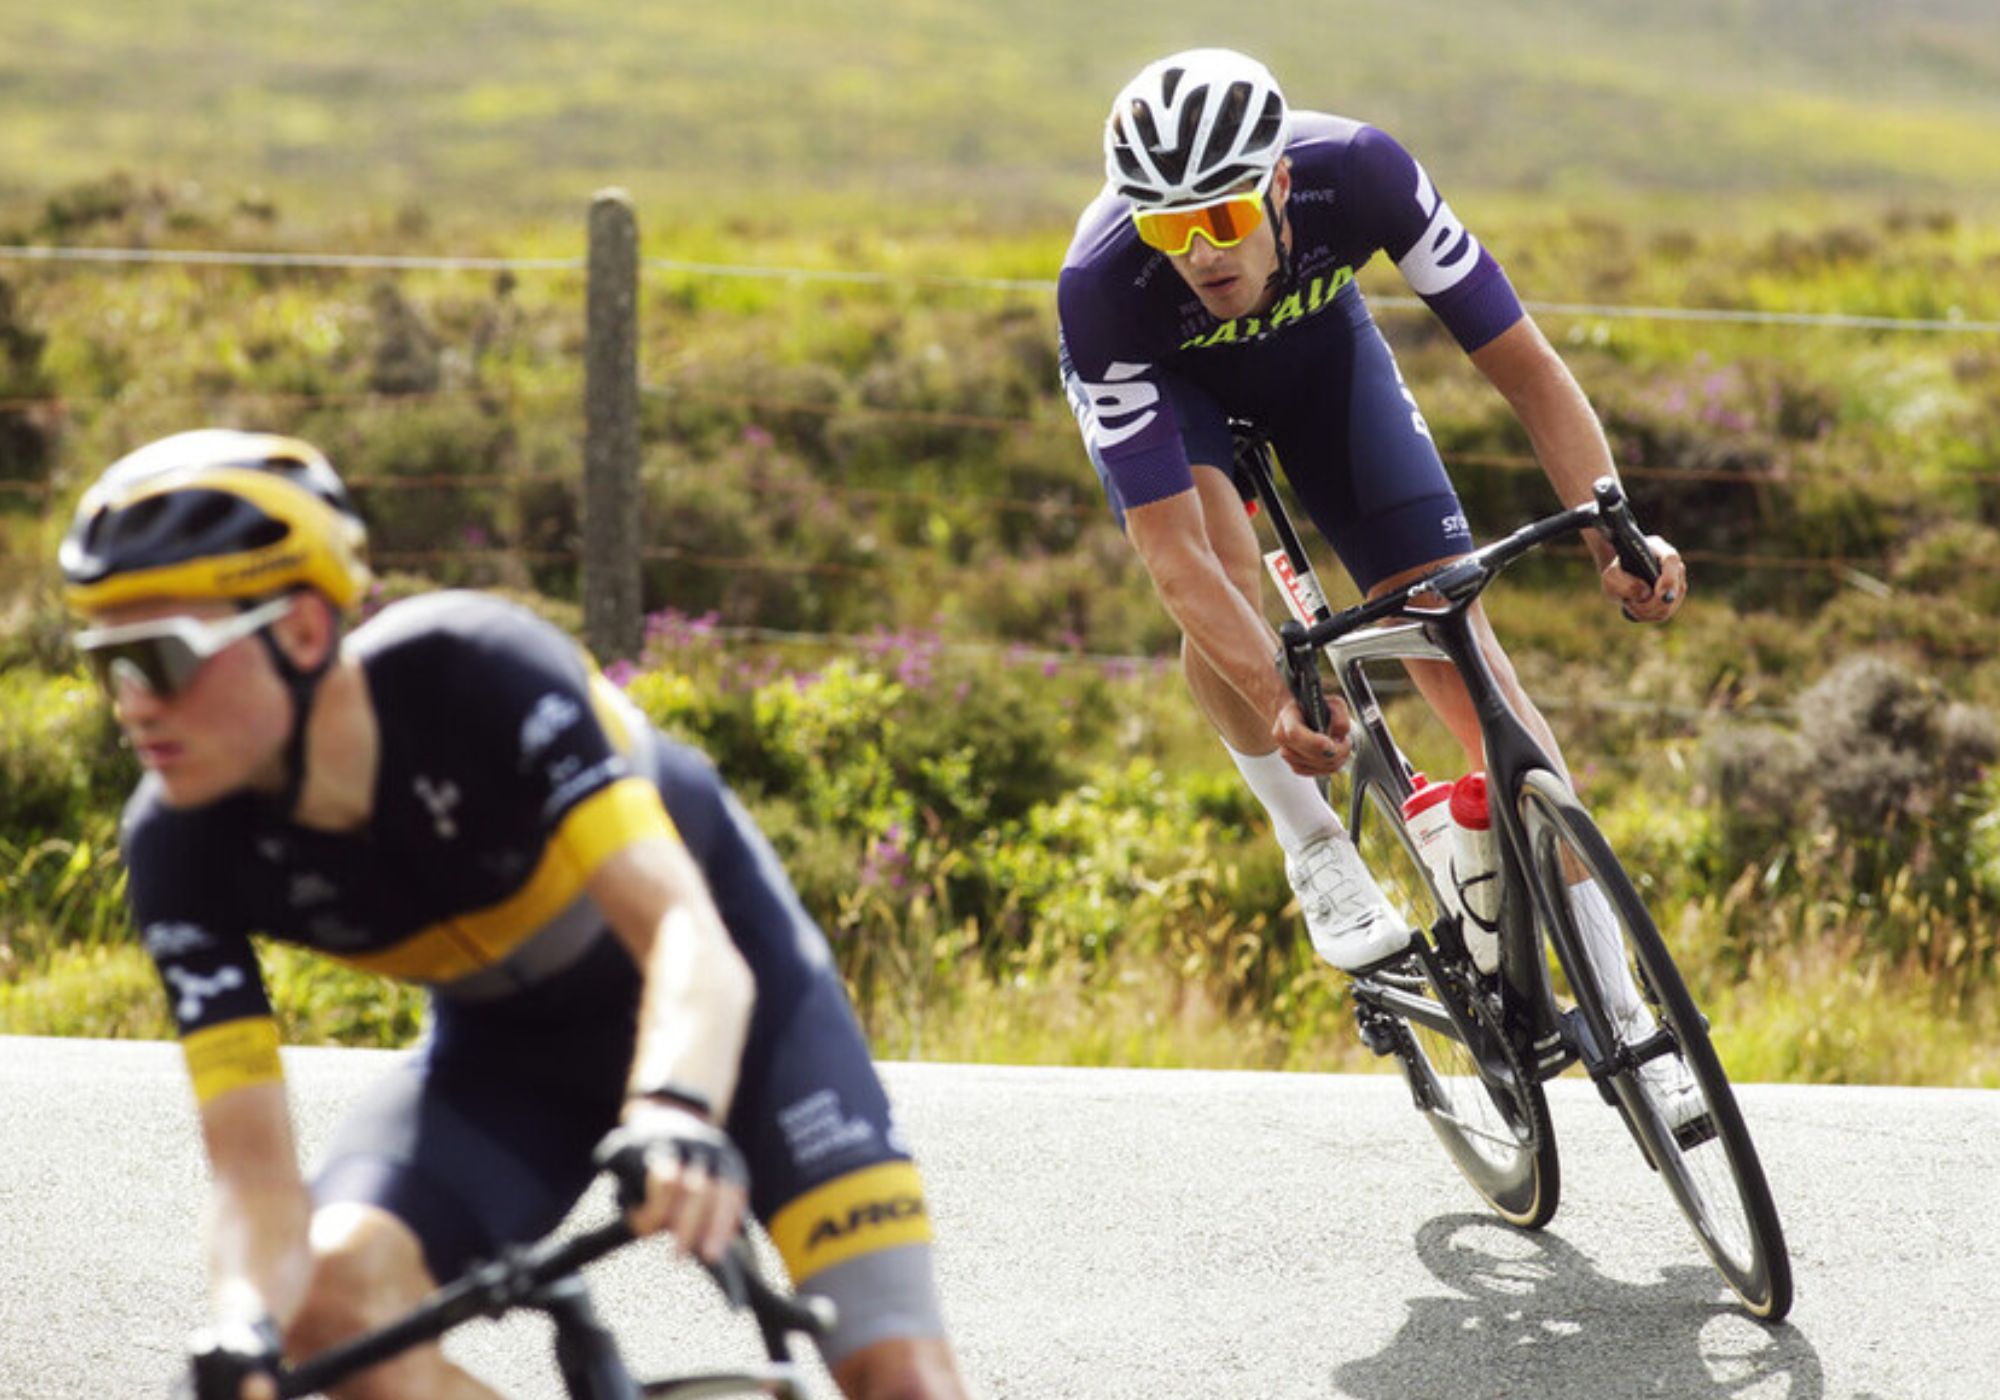 2 cyclists riding a race on the roads of the Isle of Man